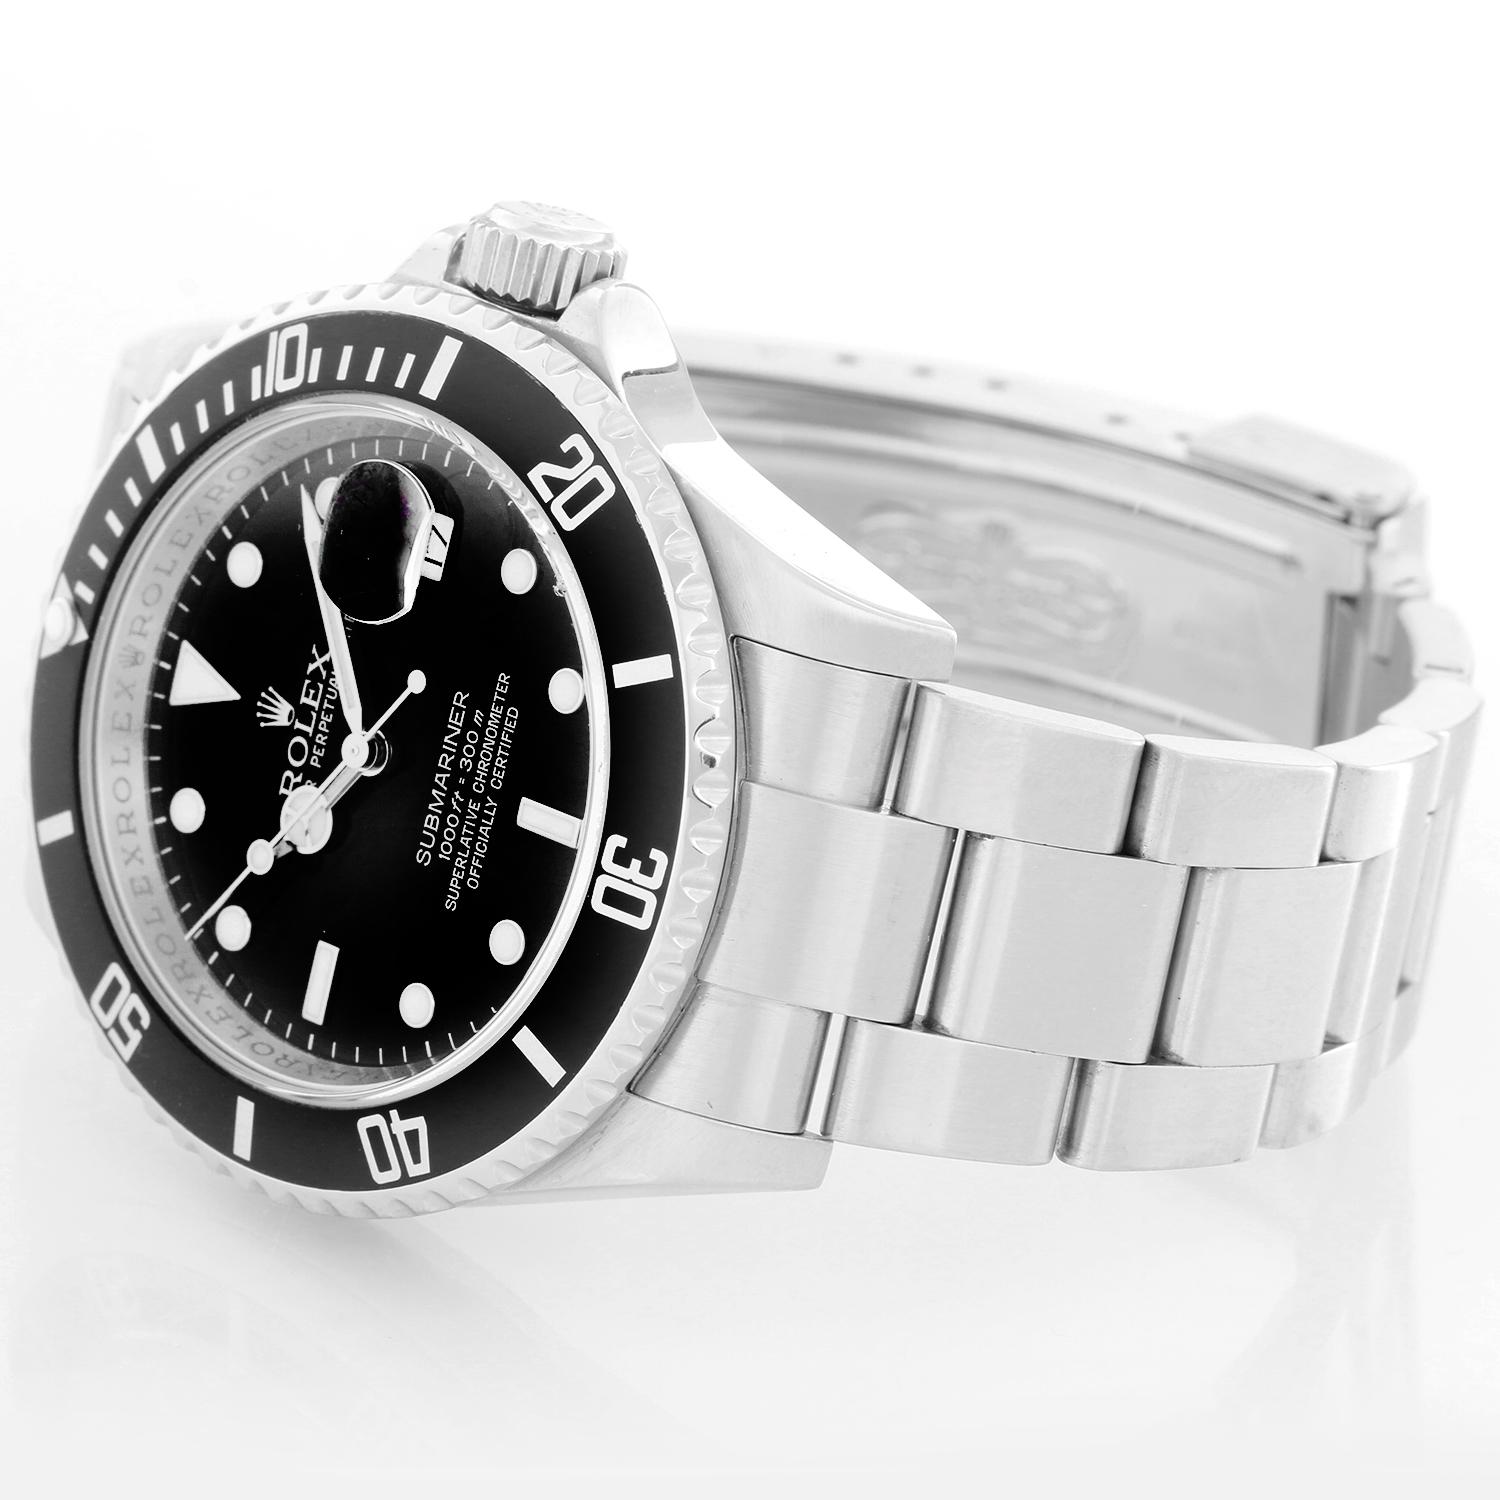 Rolex Submariner 16610 Stainless Steel Men's Watch - Automatic winding, 31 jewels, Quickset, sapphire crystal. Stainless steel case  . Black dial with luminous hour markers. Stainless steel Oyster bracelet with flip-lock clasp. Pre-owned with box